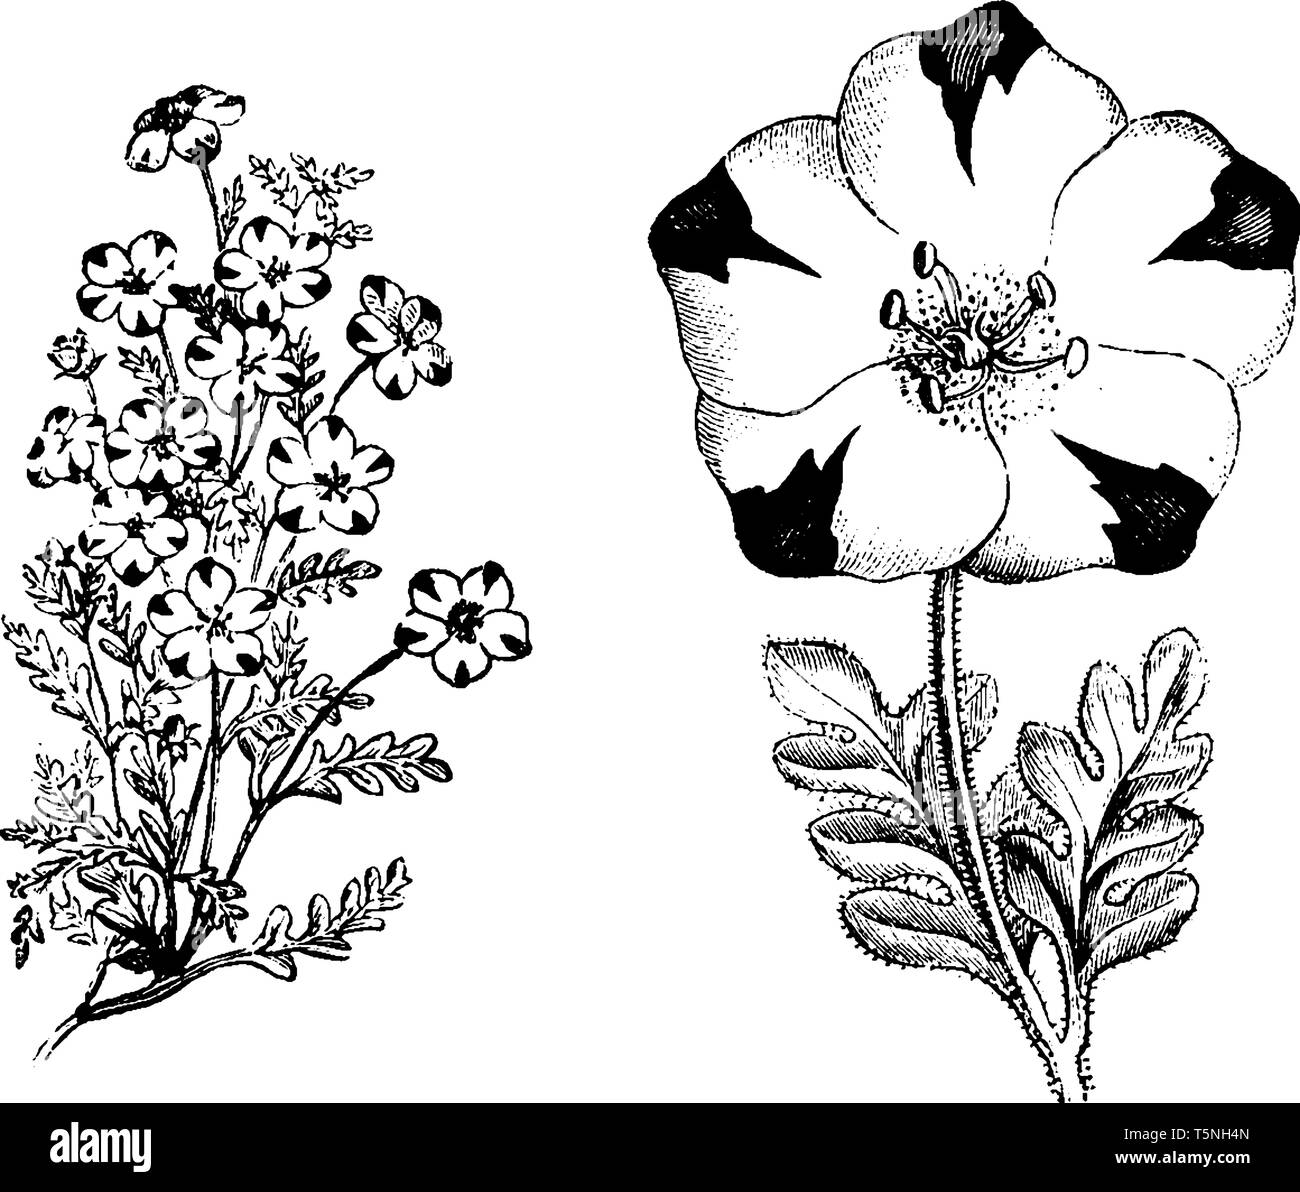 Nemophila maculata flowers in spring season and have a purple blotch on the tip of it, vintage line drawing or engraving illustration. Stock Vector